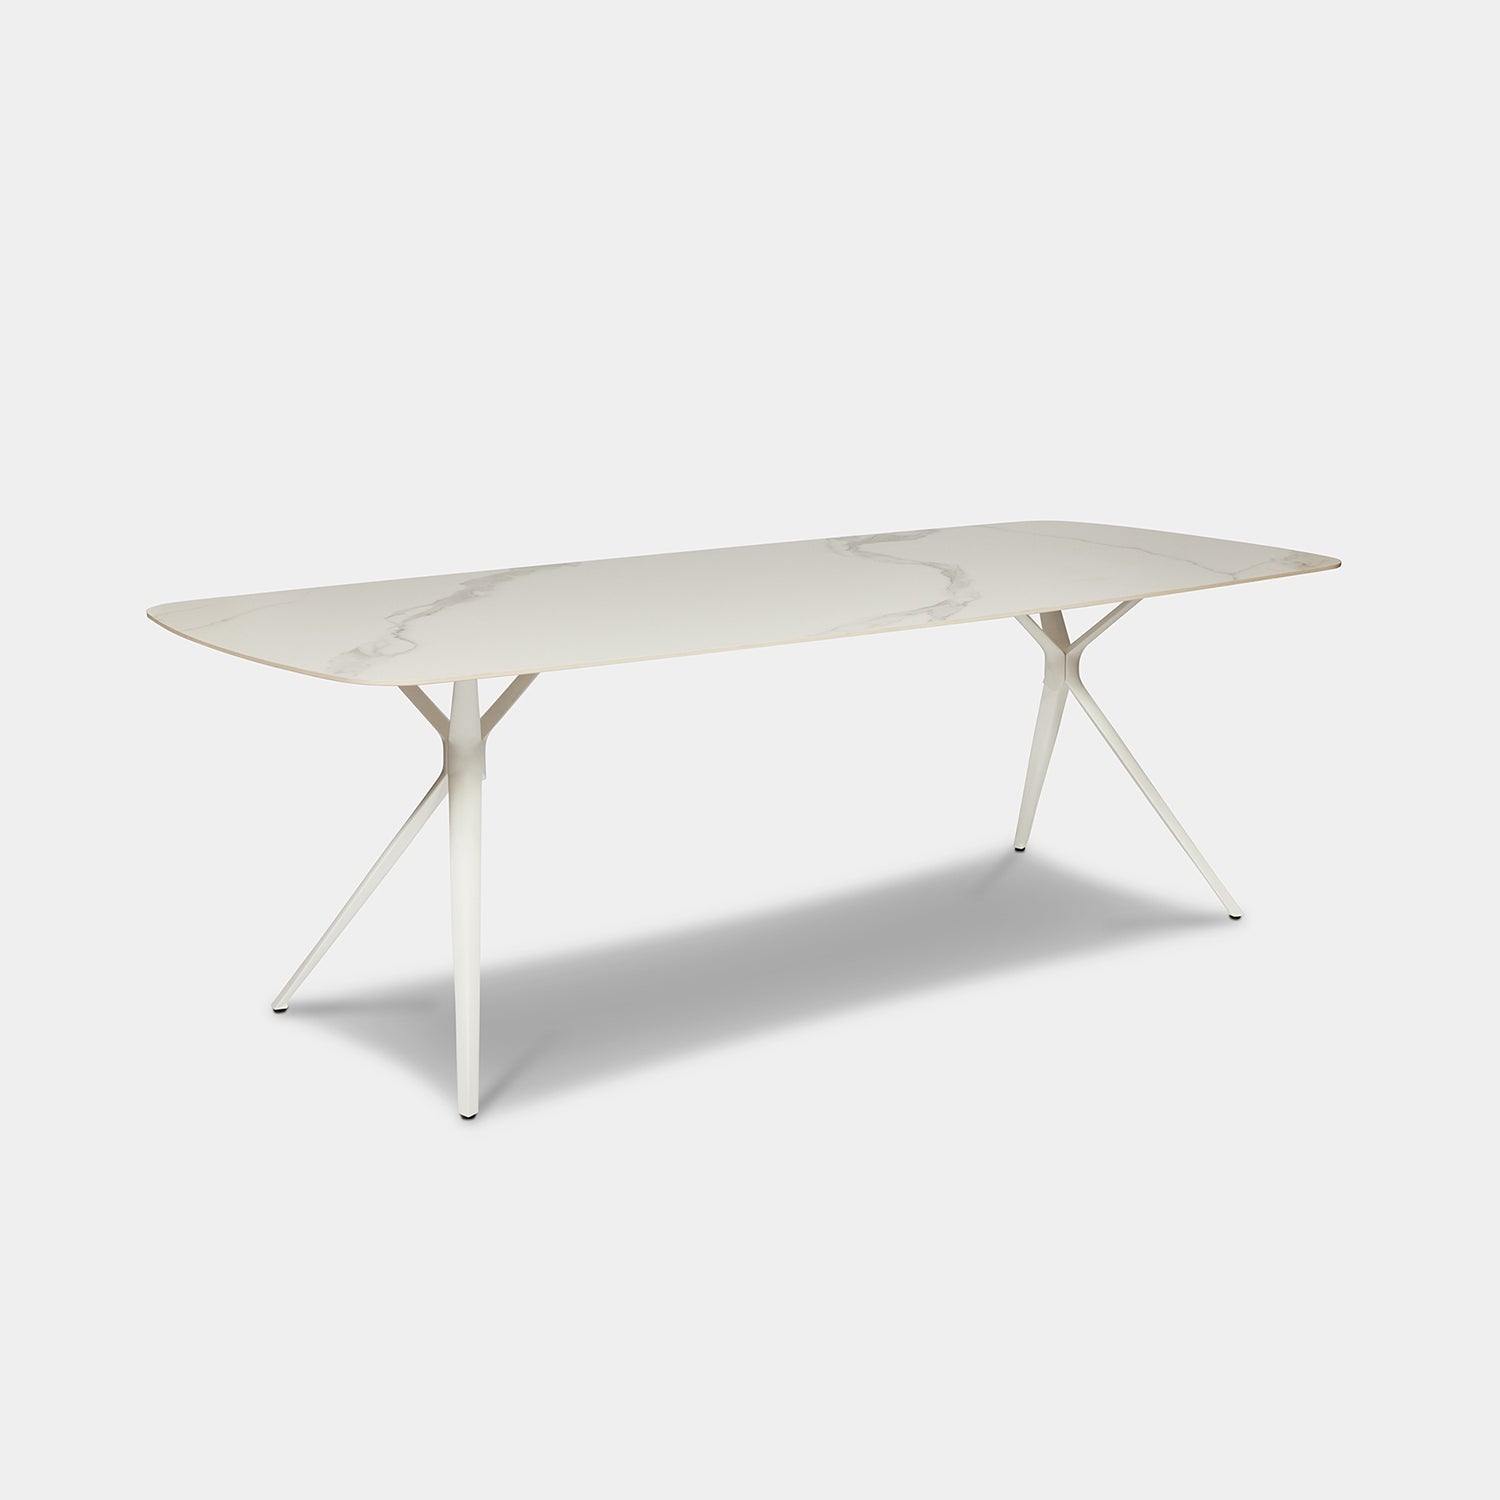 white sintered stone outdoor dining table 240cm